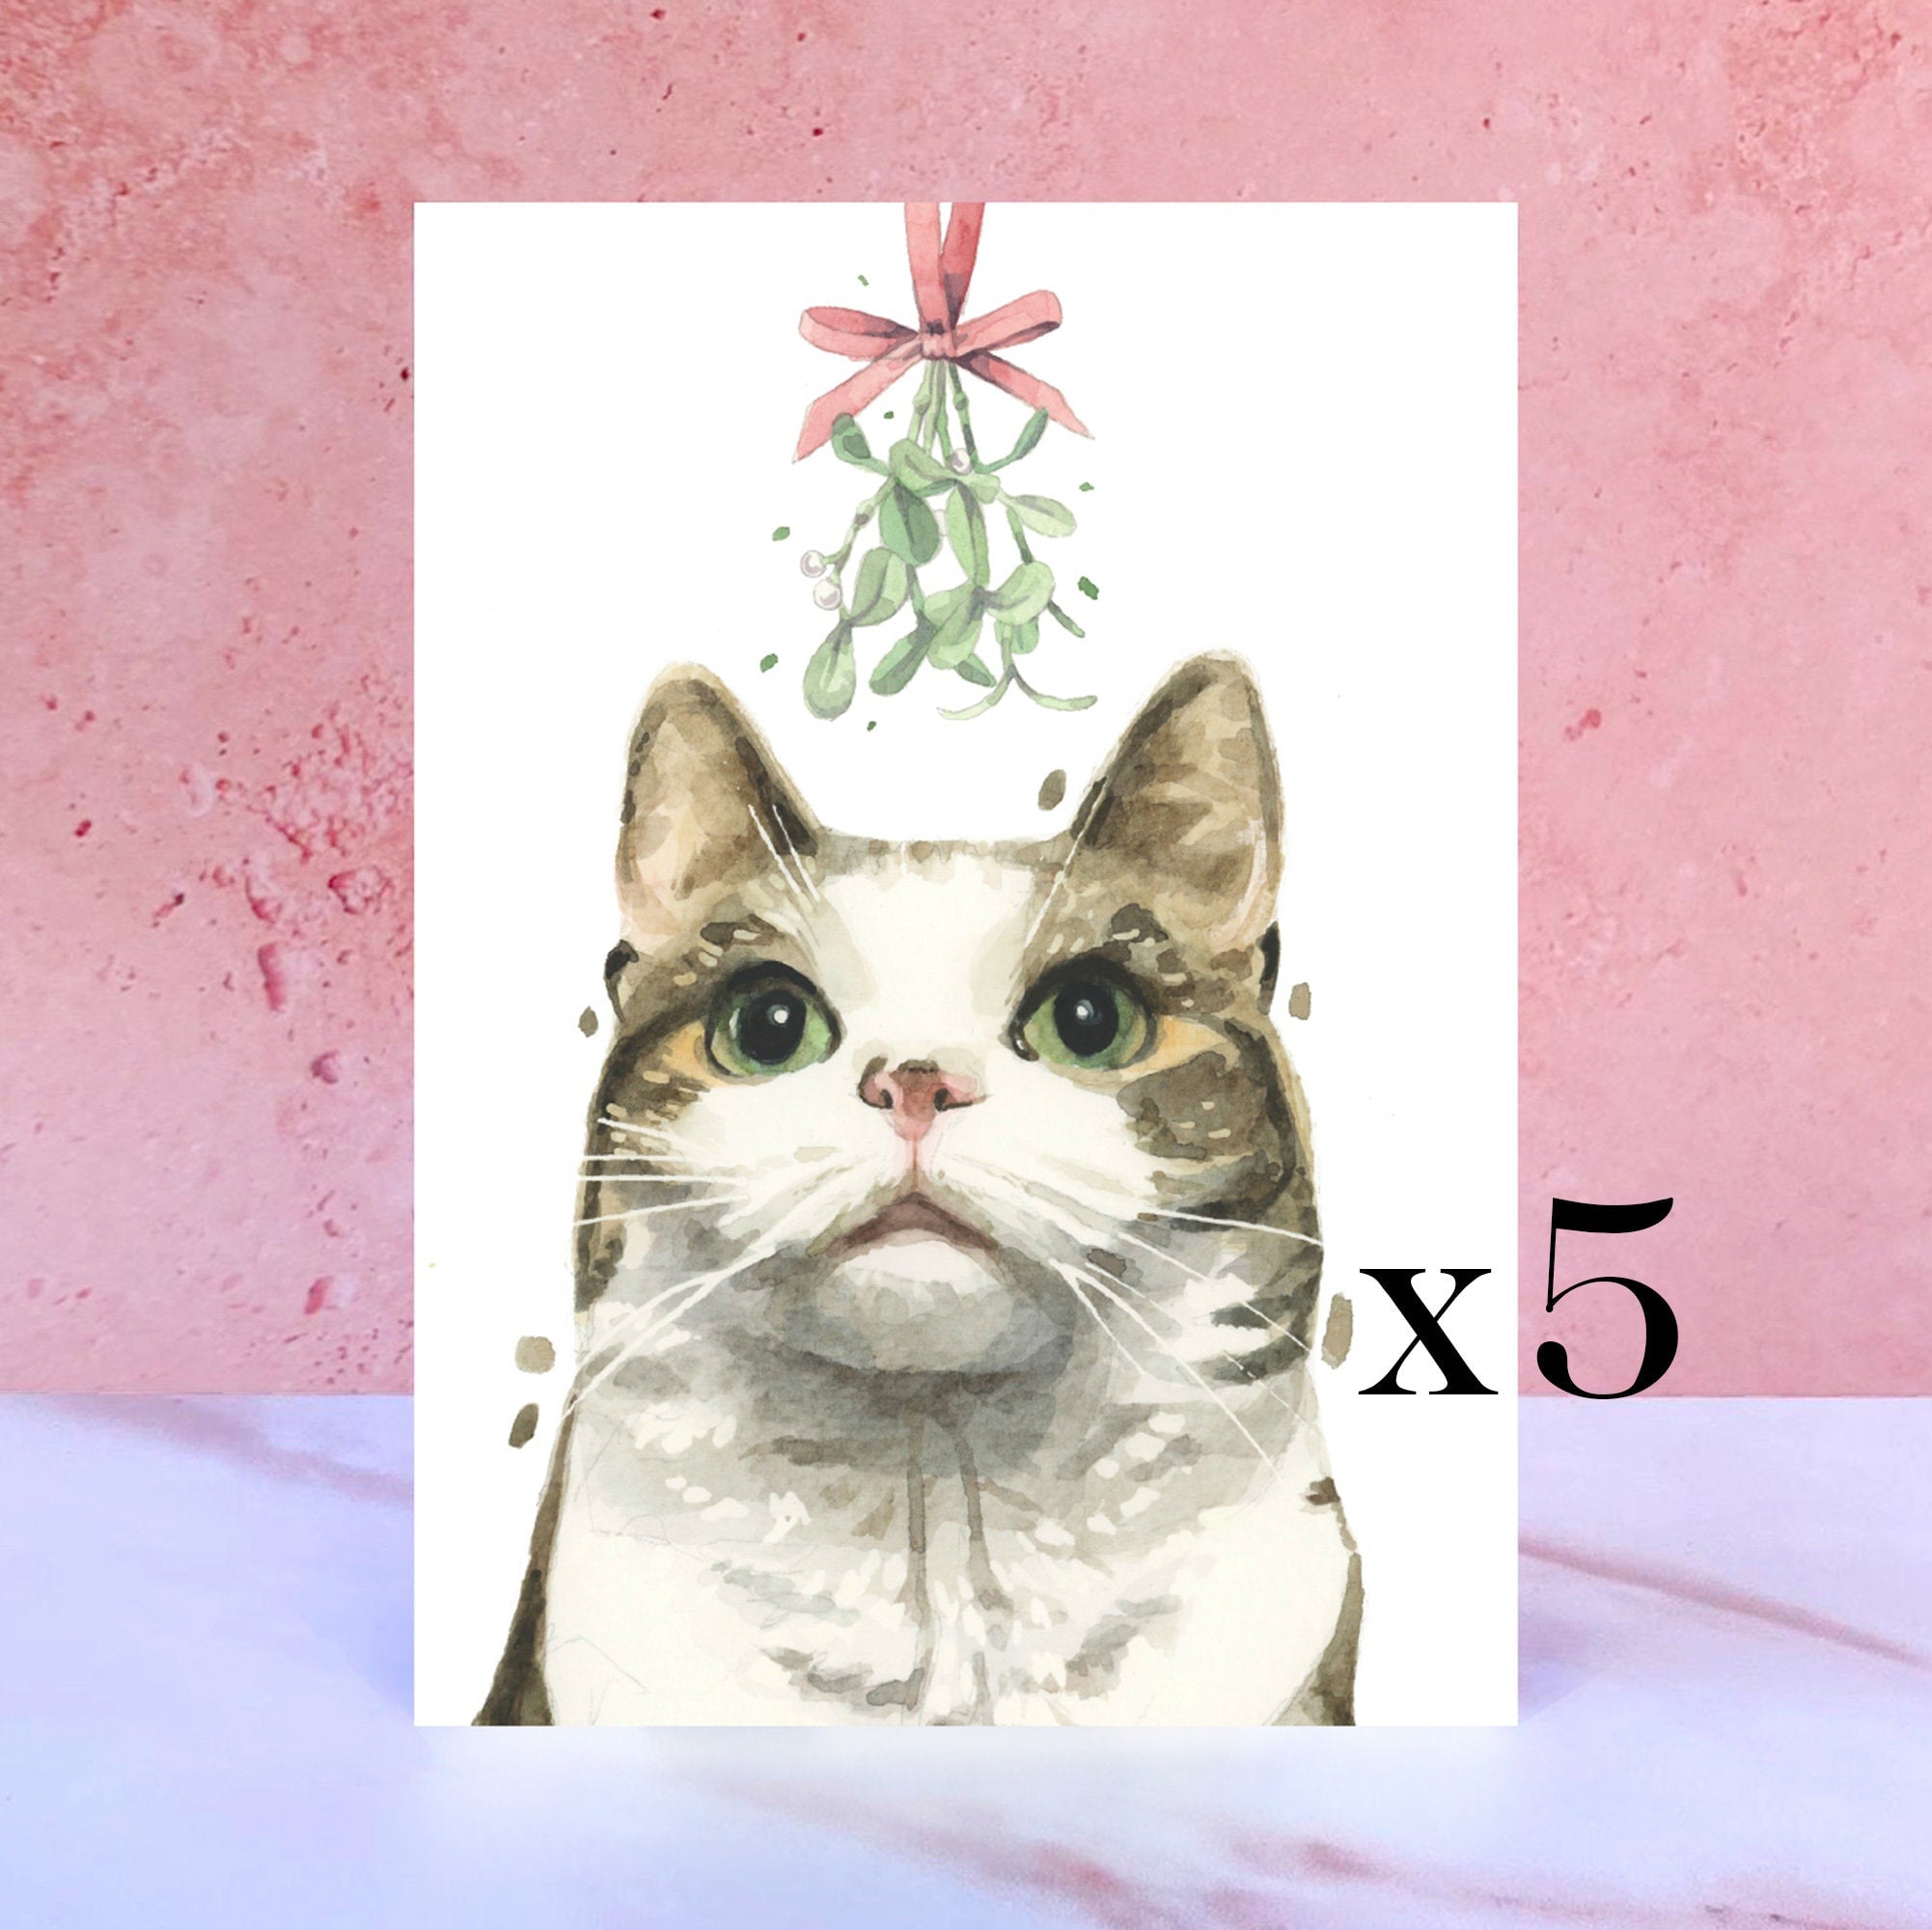 Pack of 5 Tabby and White Cat Christmas Cards